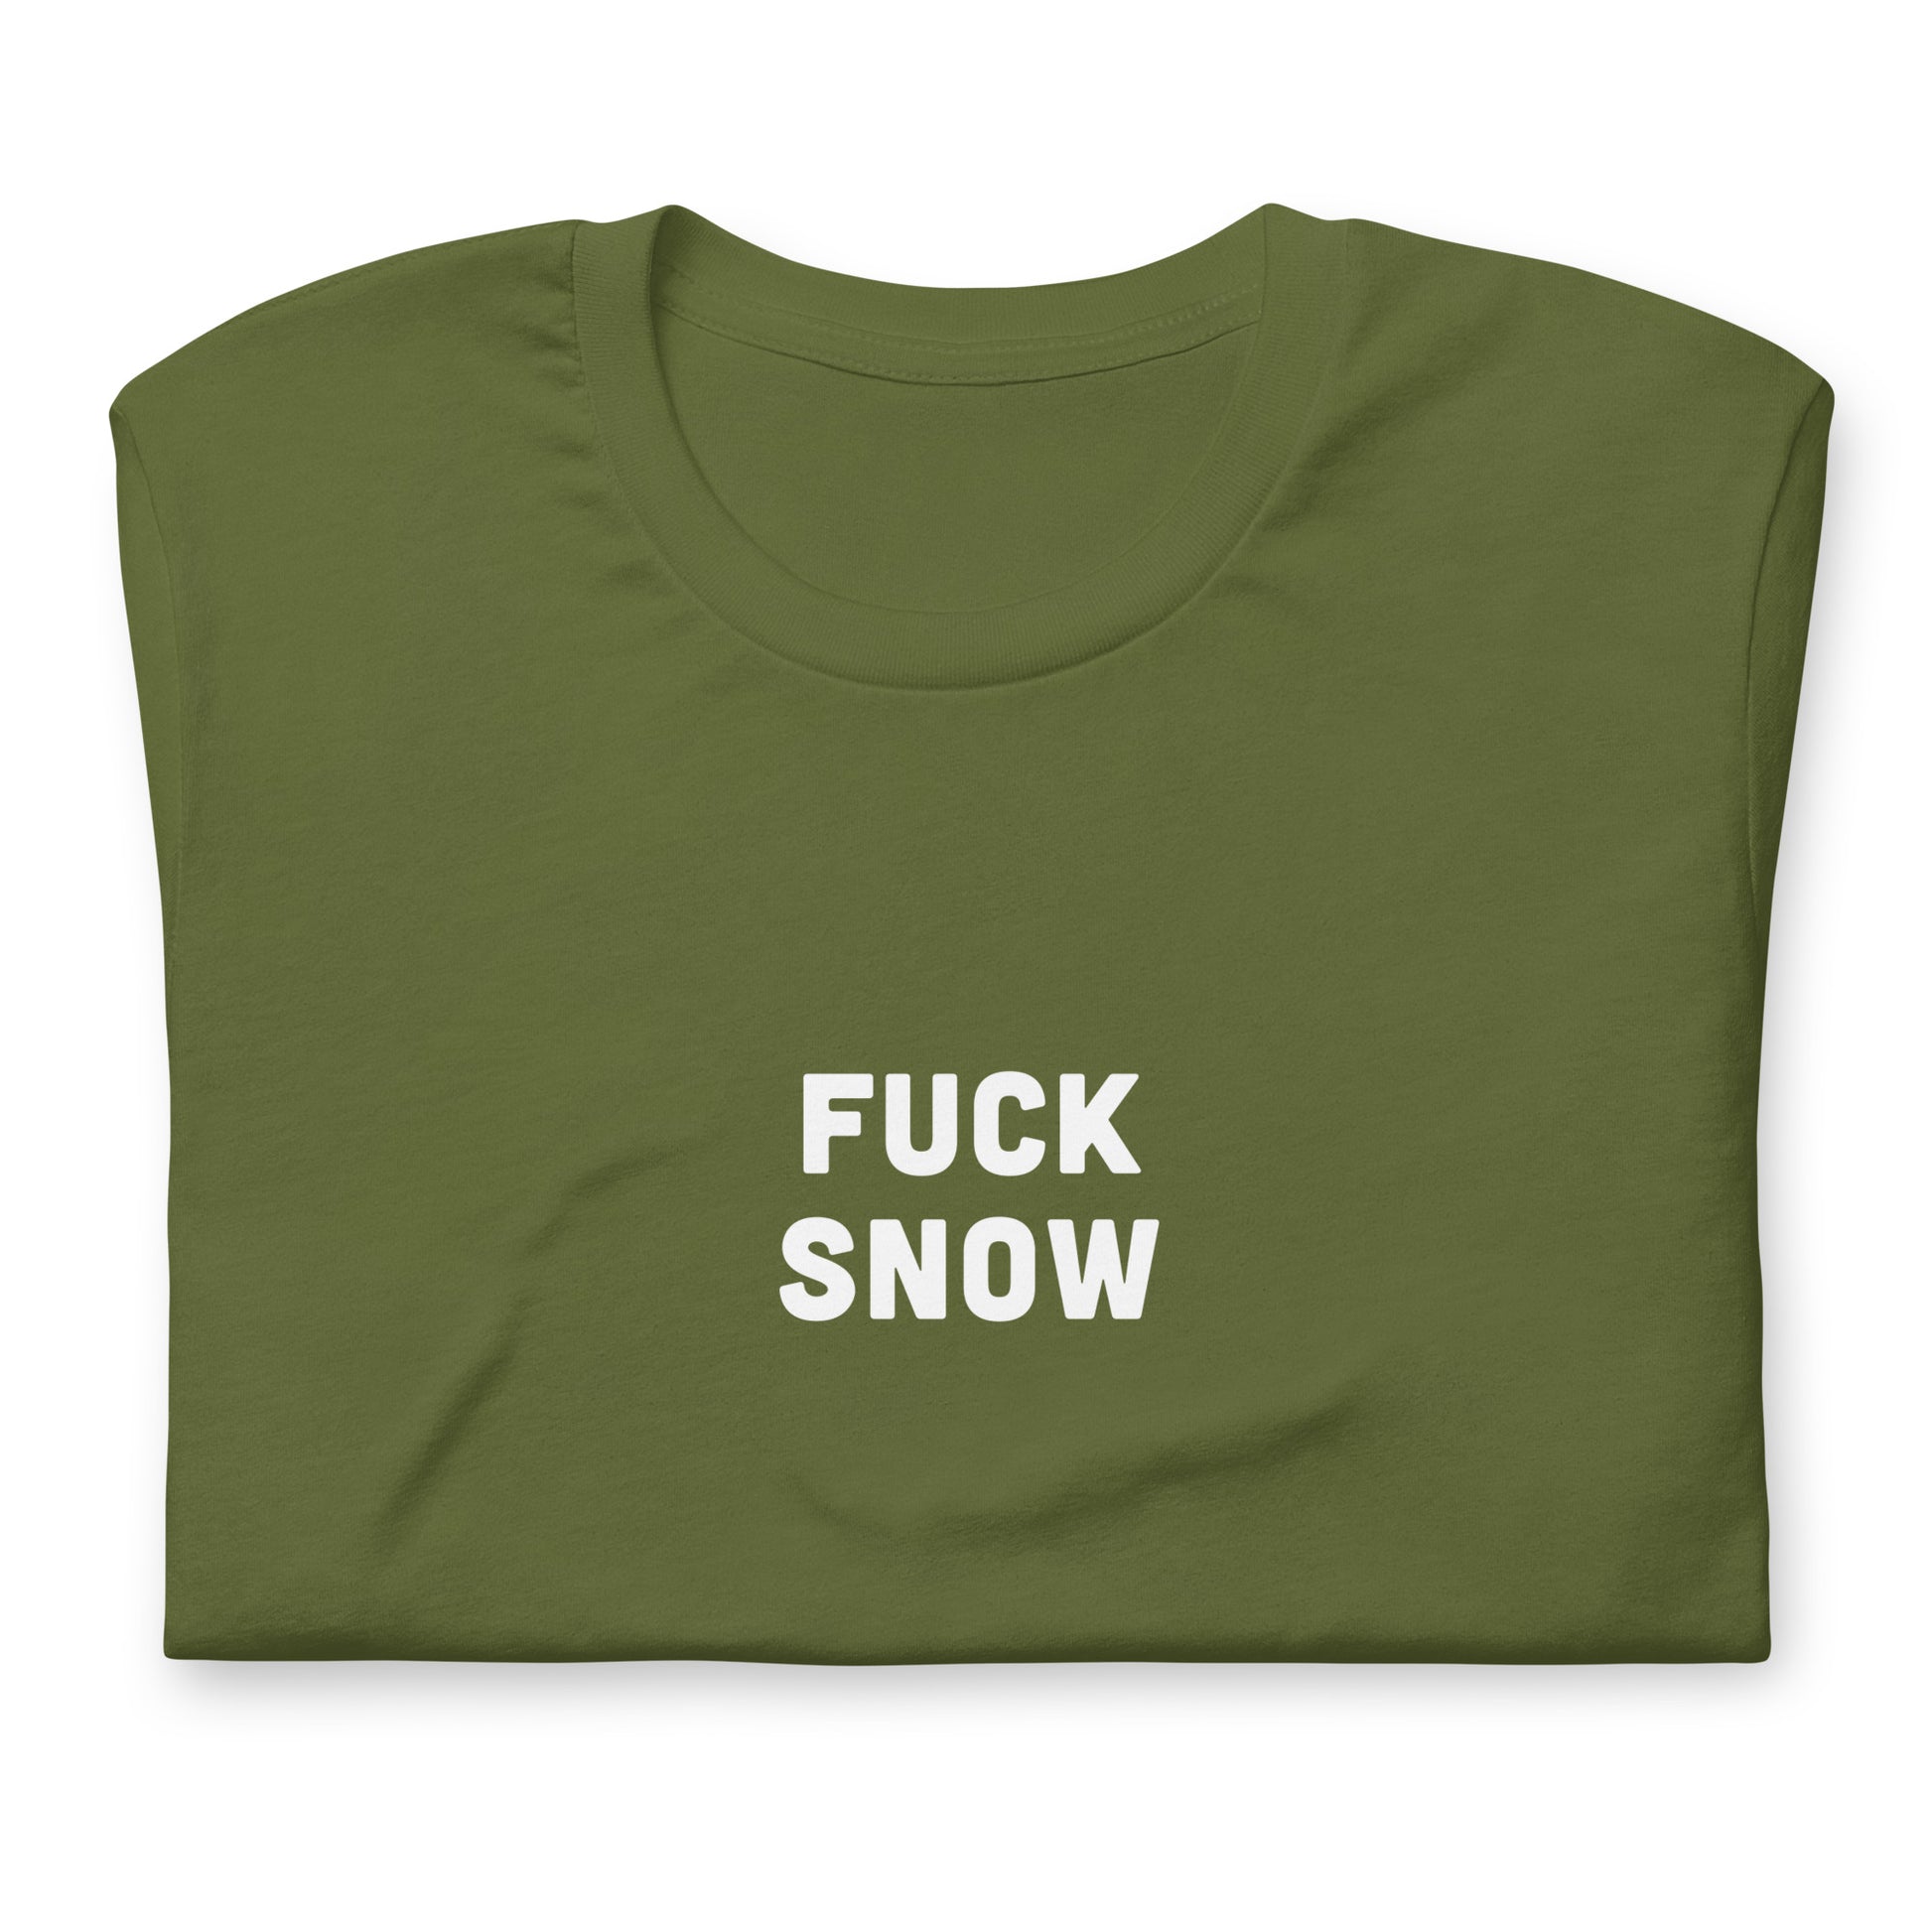 Fuck Snow T-Shirt Size S Color Navy